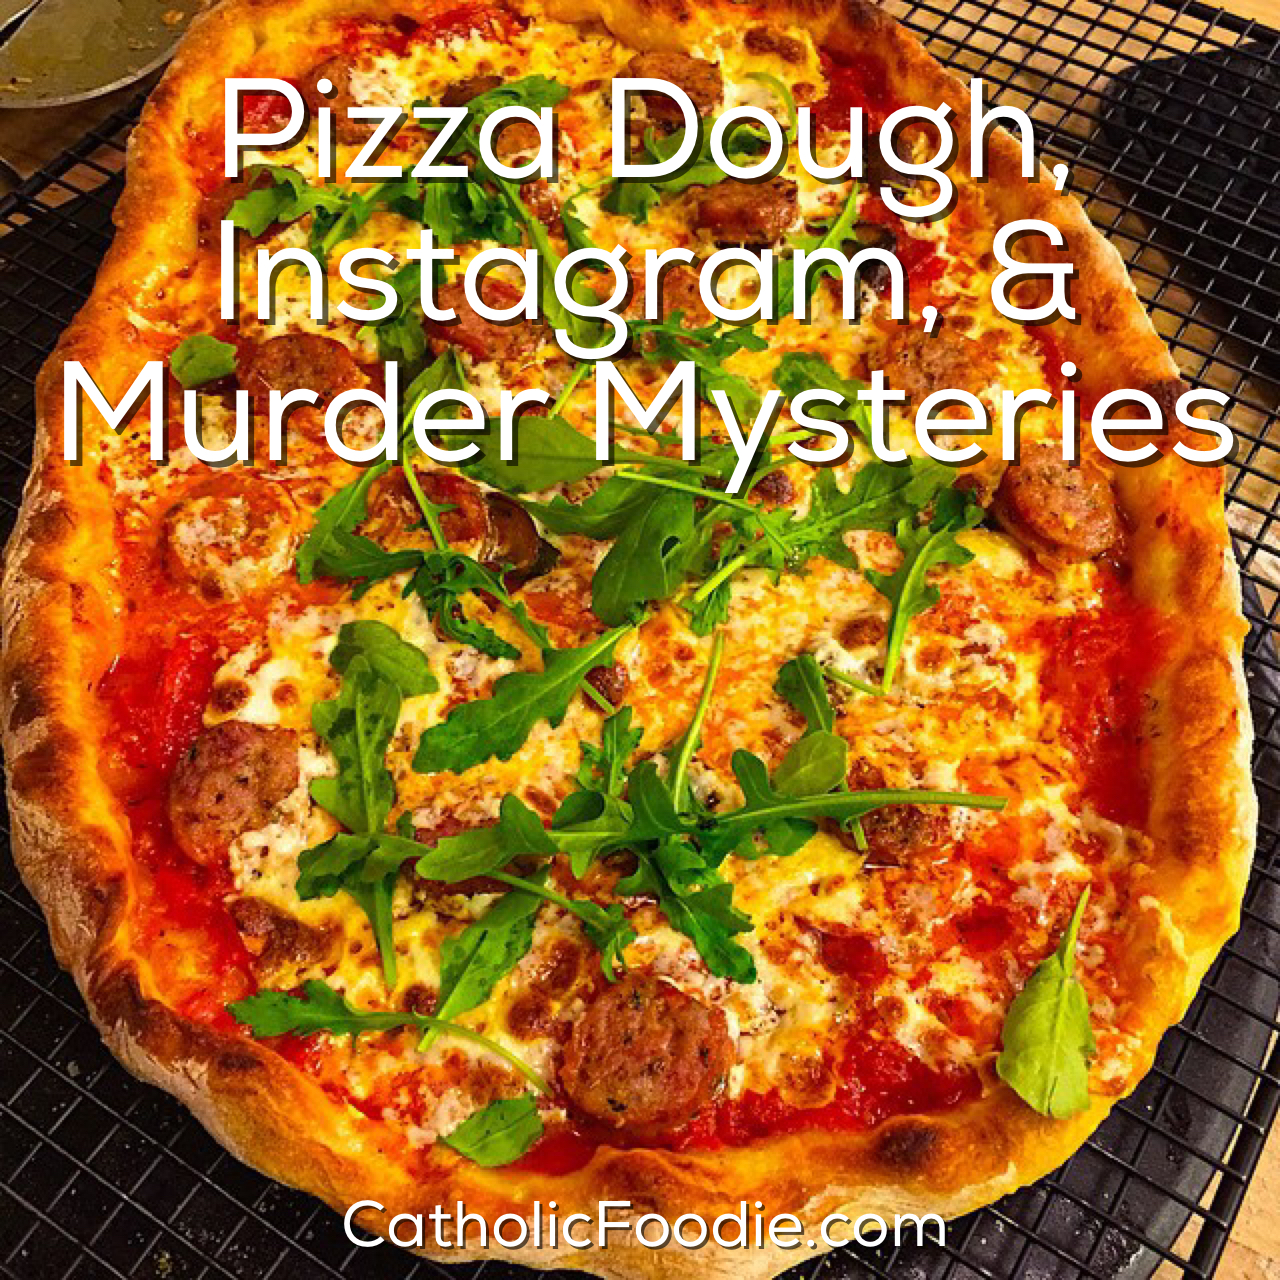 Pizza Dough, Instagram, and Murder Mysteries